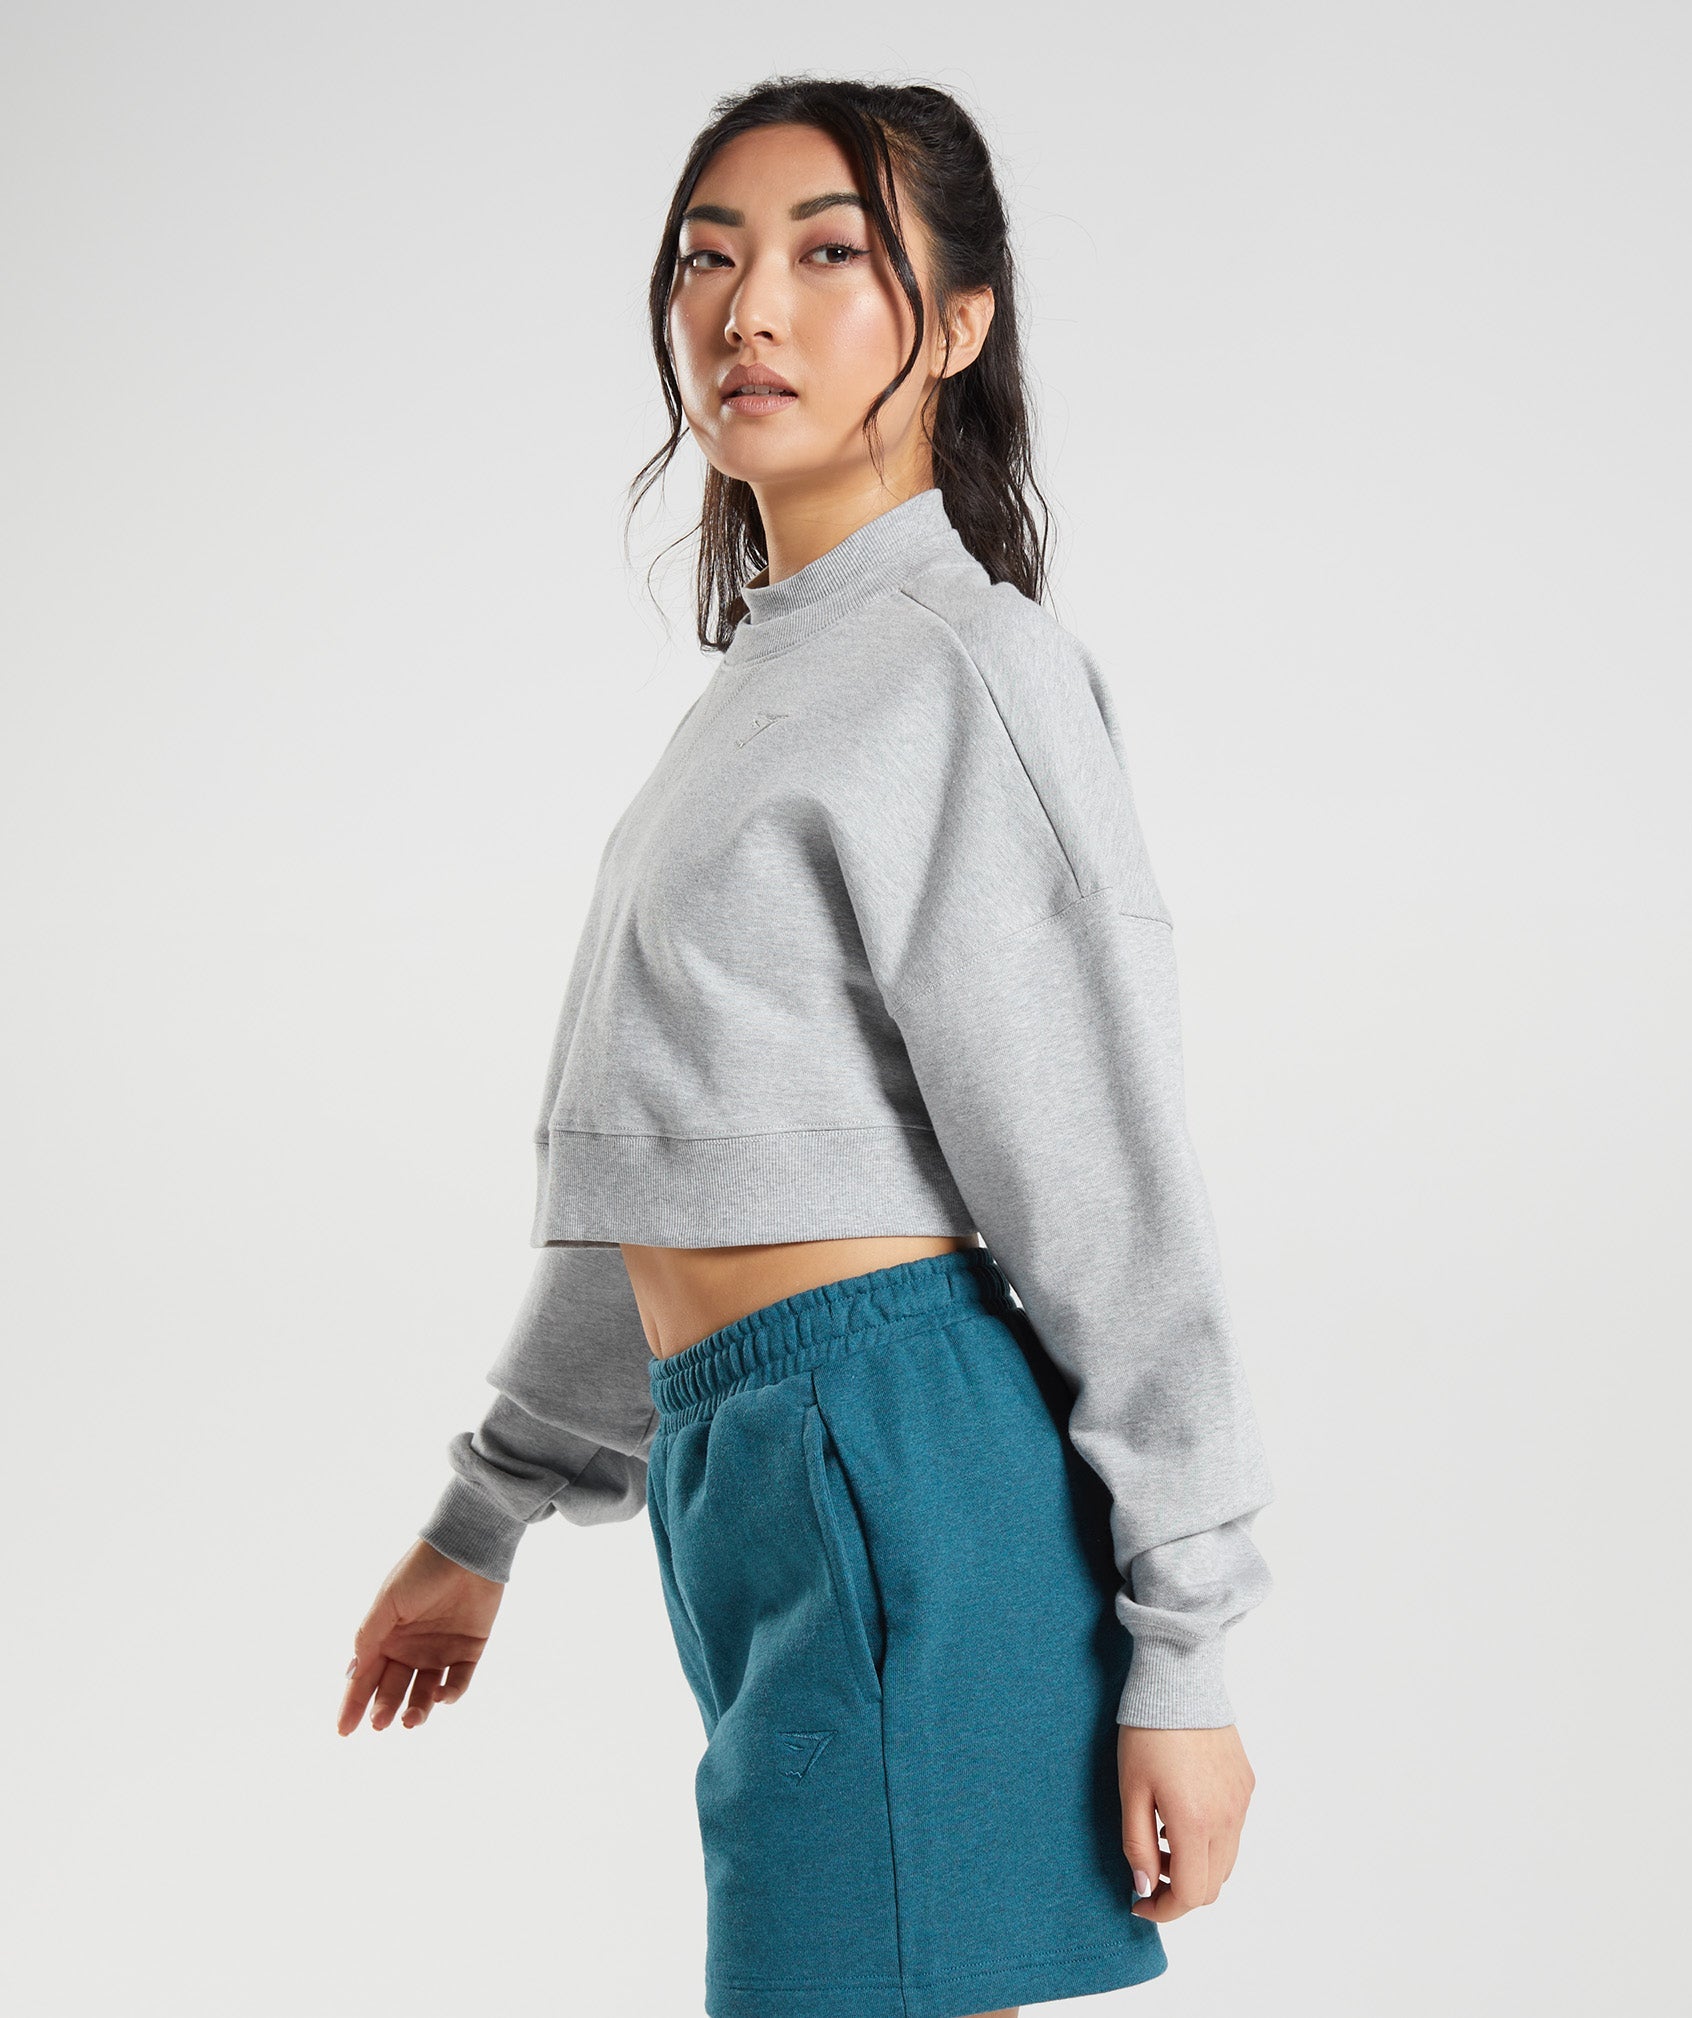 Rest Day Sweats Cropped Pullover in Light Grey Core Marl - view 3